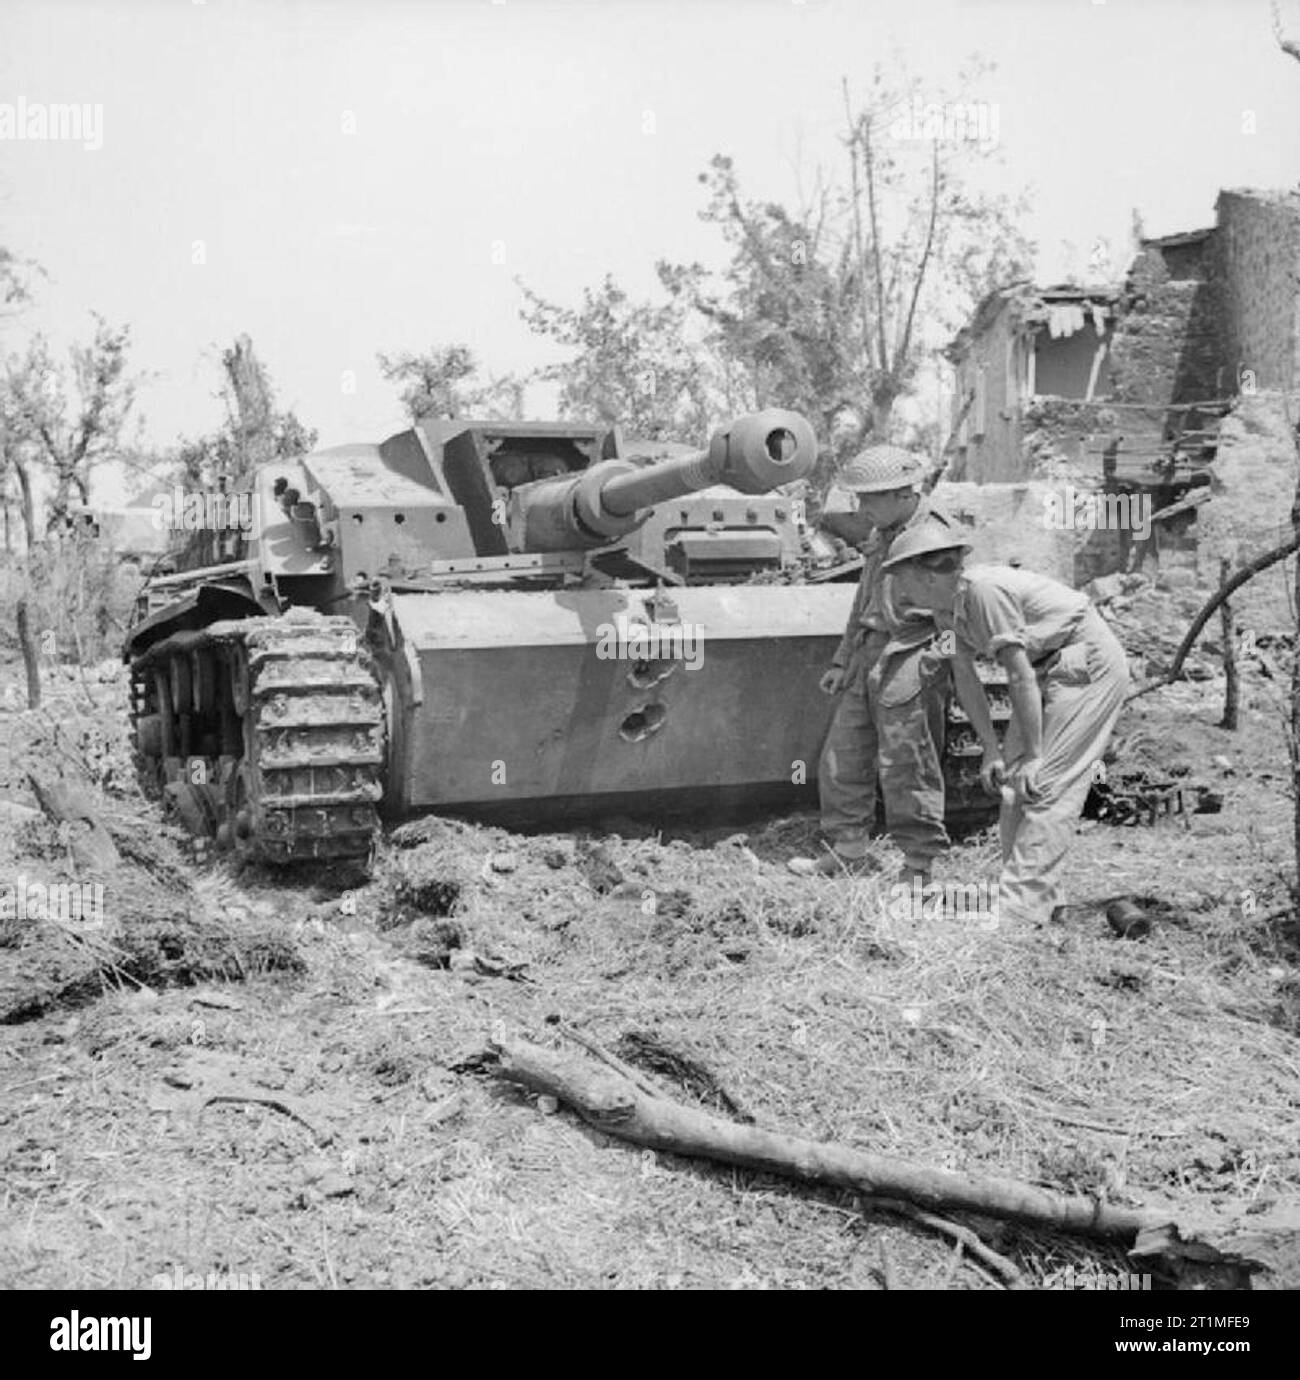 British troops examine a knocked-out German StuG III assault gun near Cassino, Italy, 18 May 1944. Troops examine a knocked-out German StuG III assault gun near Cassino, 18 May 1944. Two 75mm AP rounds from a Sherman tank have neatly penetrated its front armour. Stock Photo